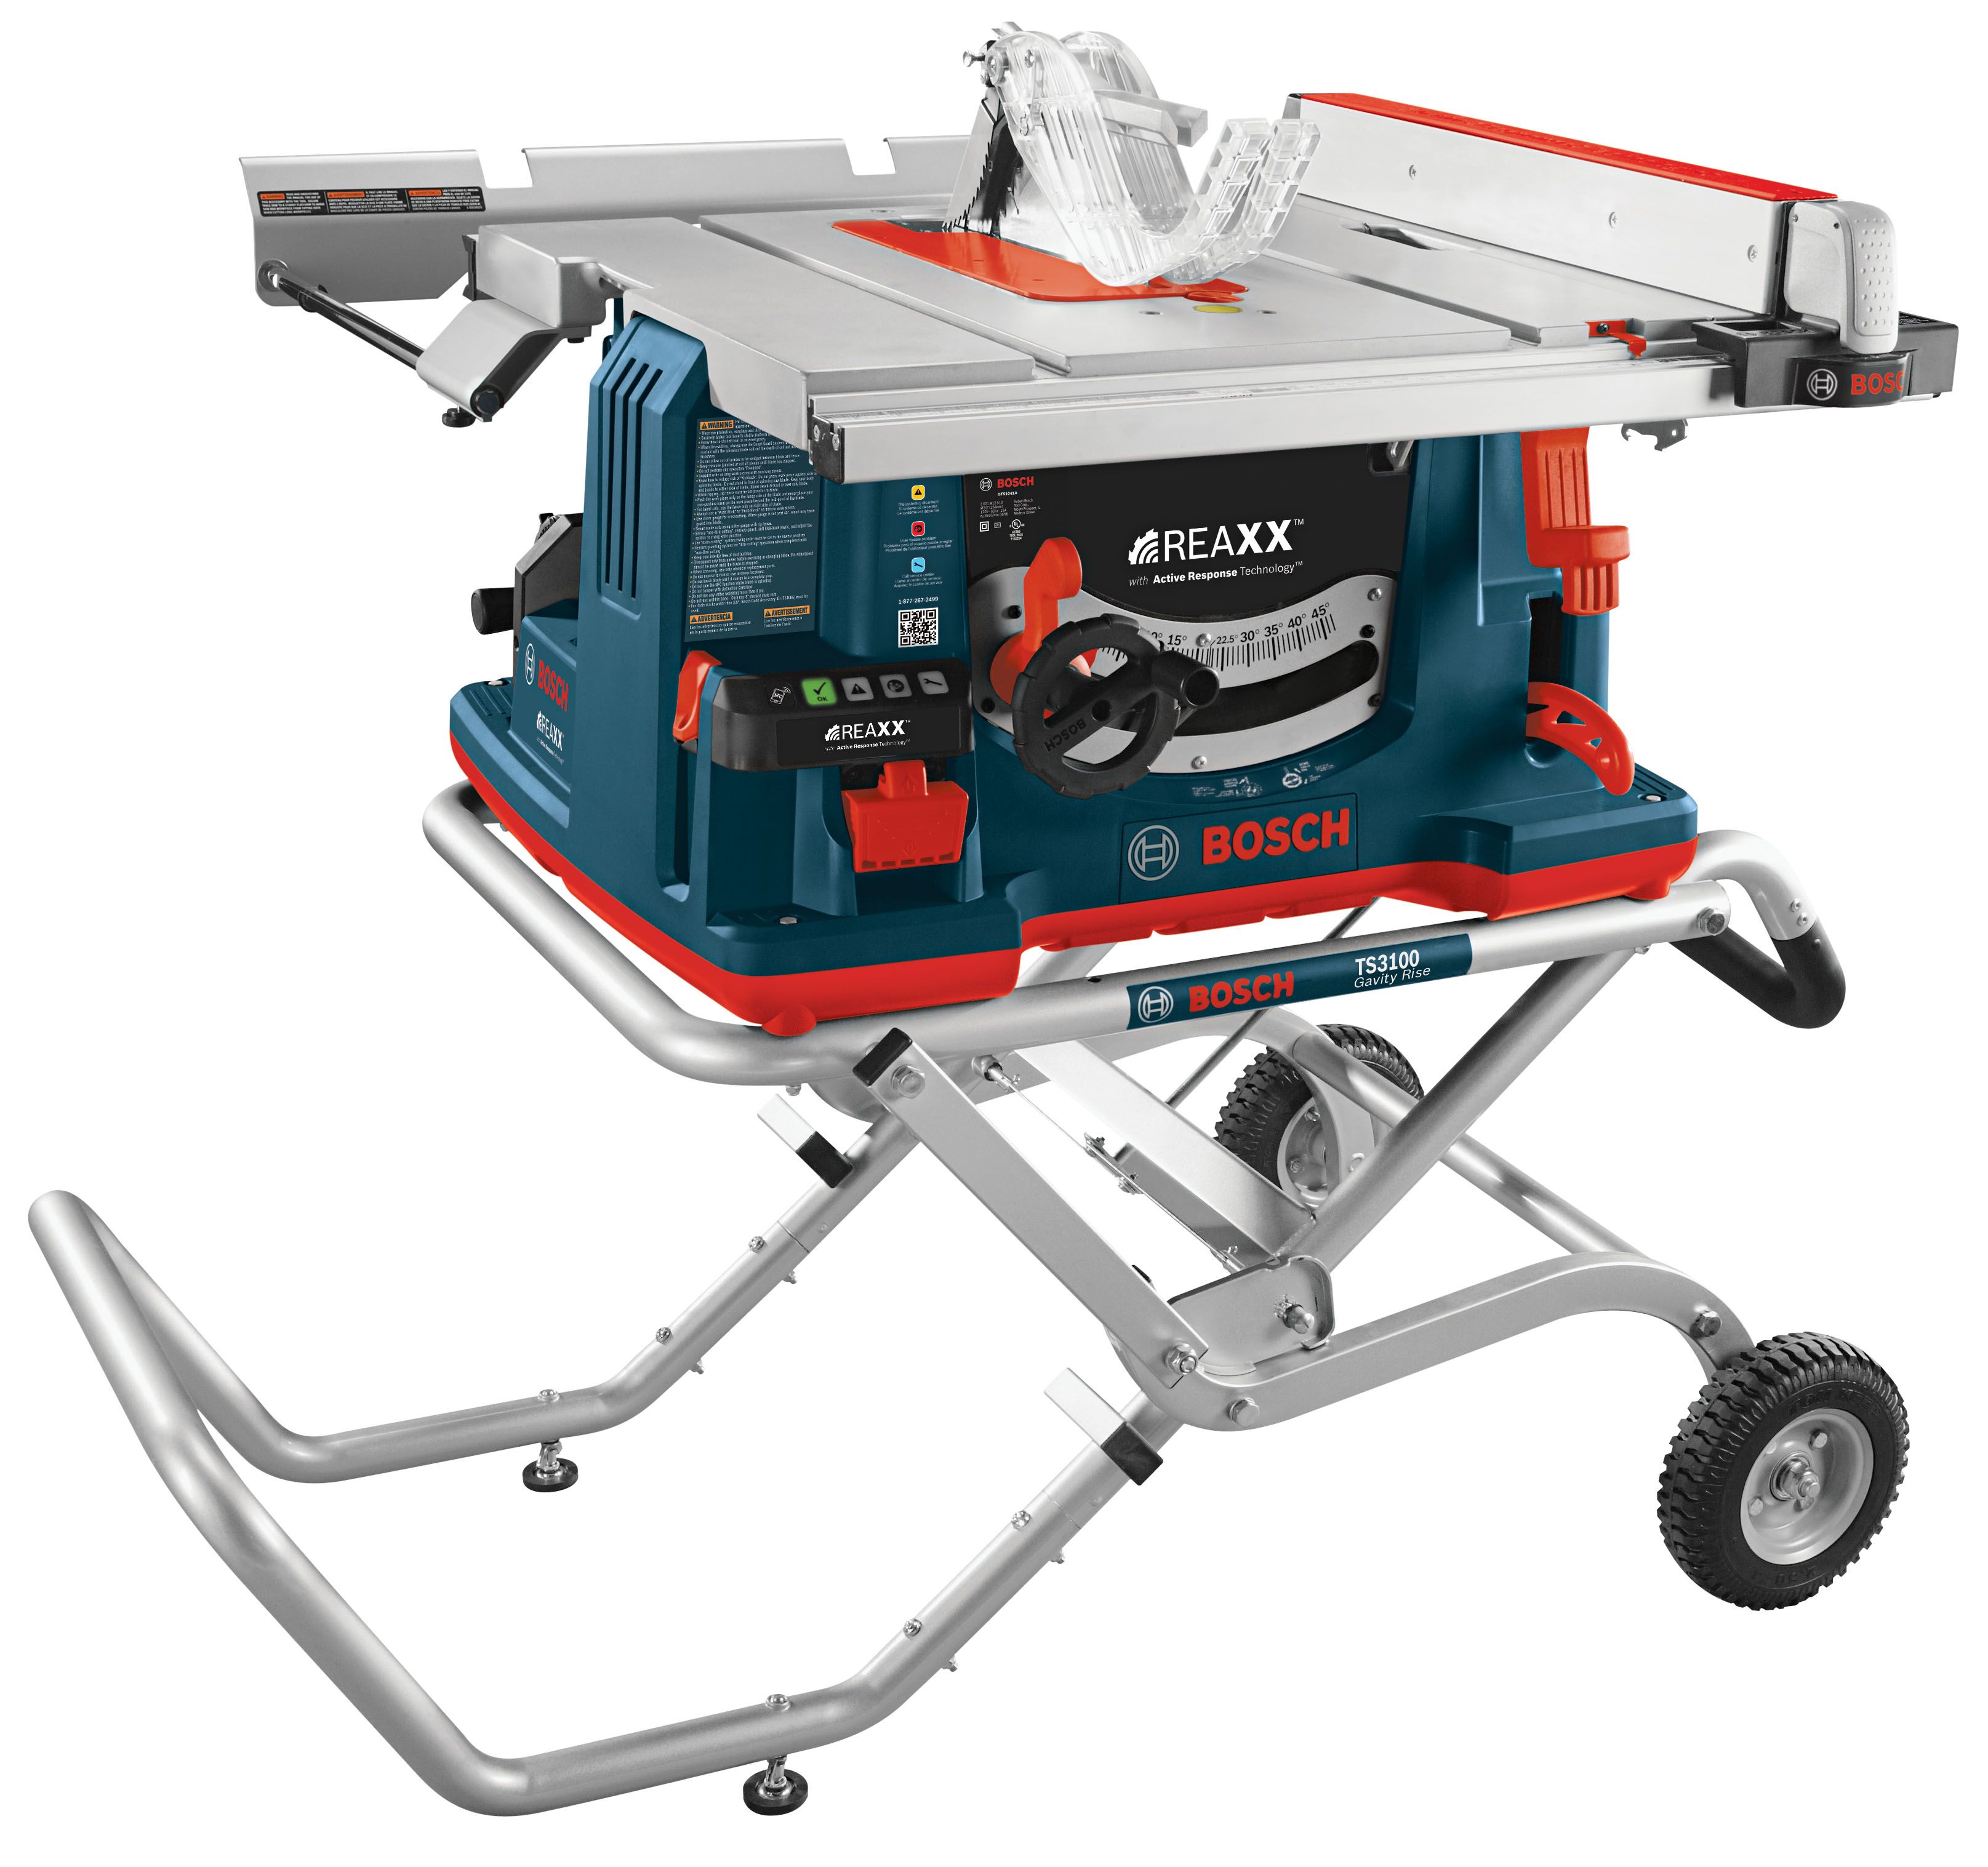 We're Much Closer to SawStop-Like Table Saw Regulations – Update